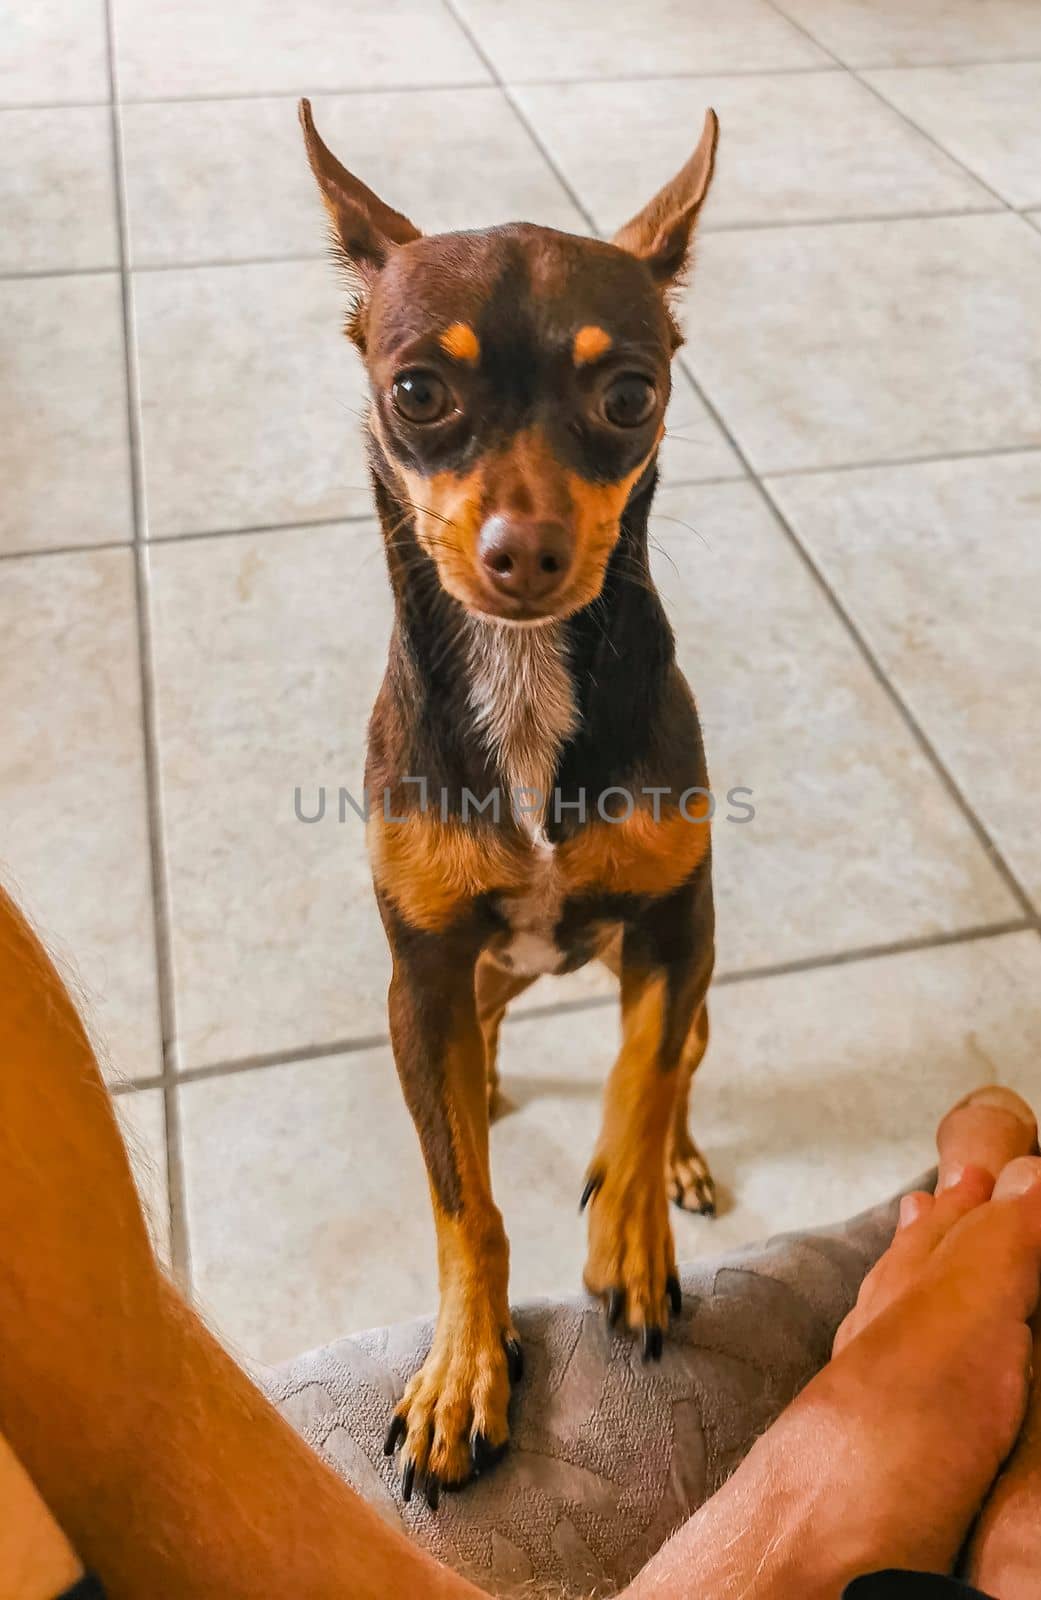 Russian toy terrier dog portrait looking playful and cute Mexico. by Arkadij